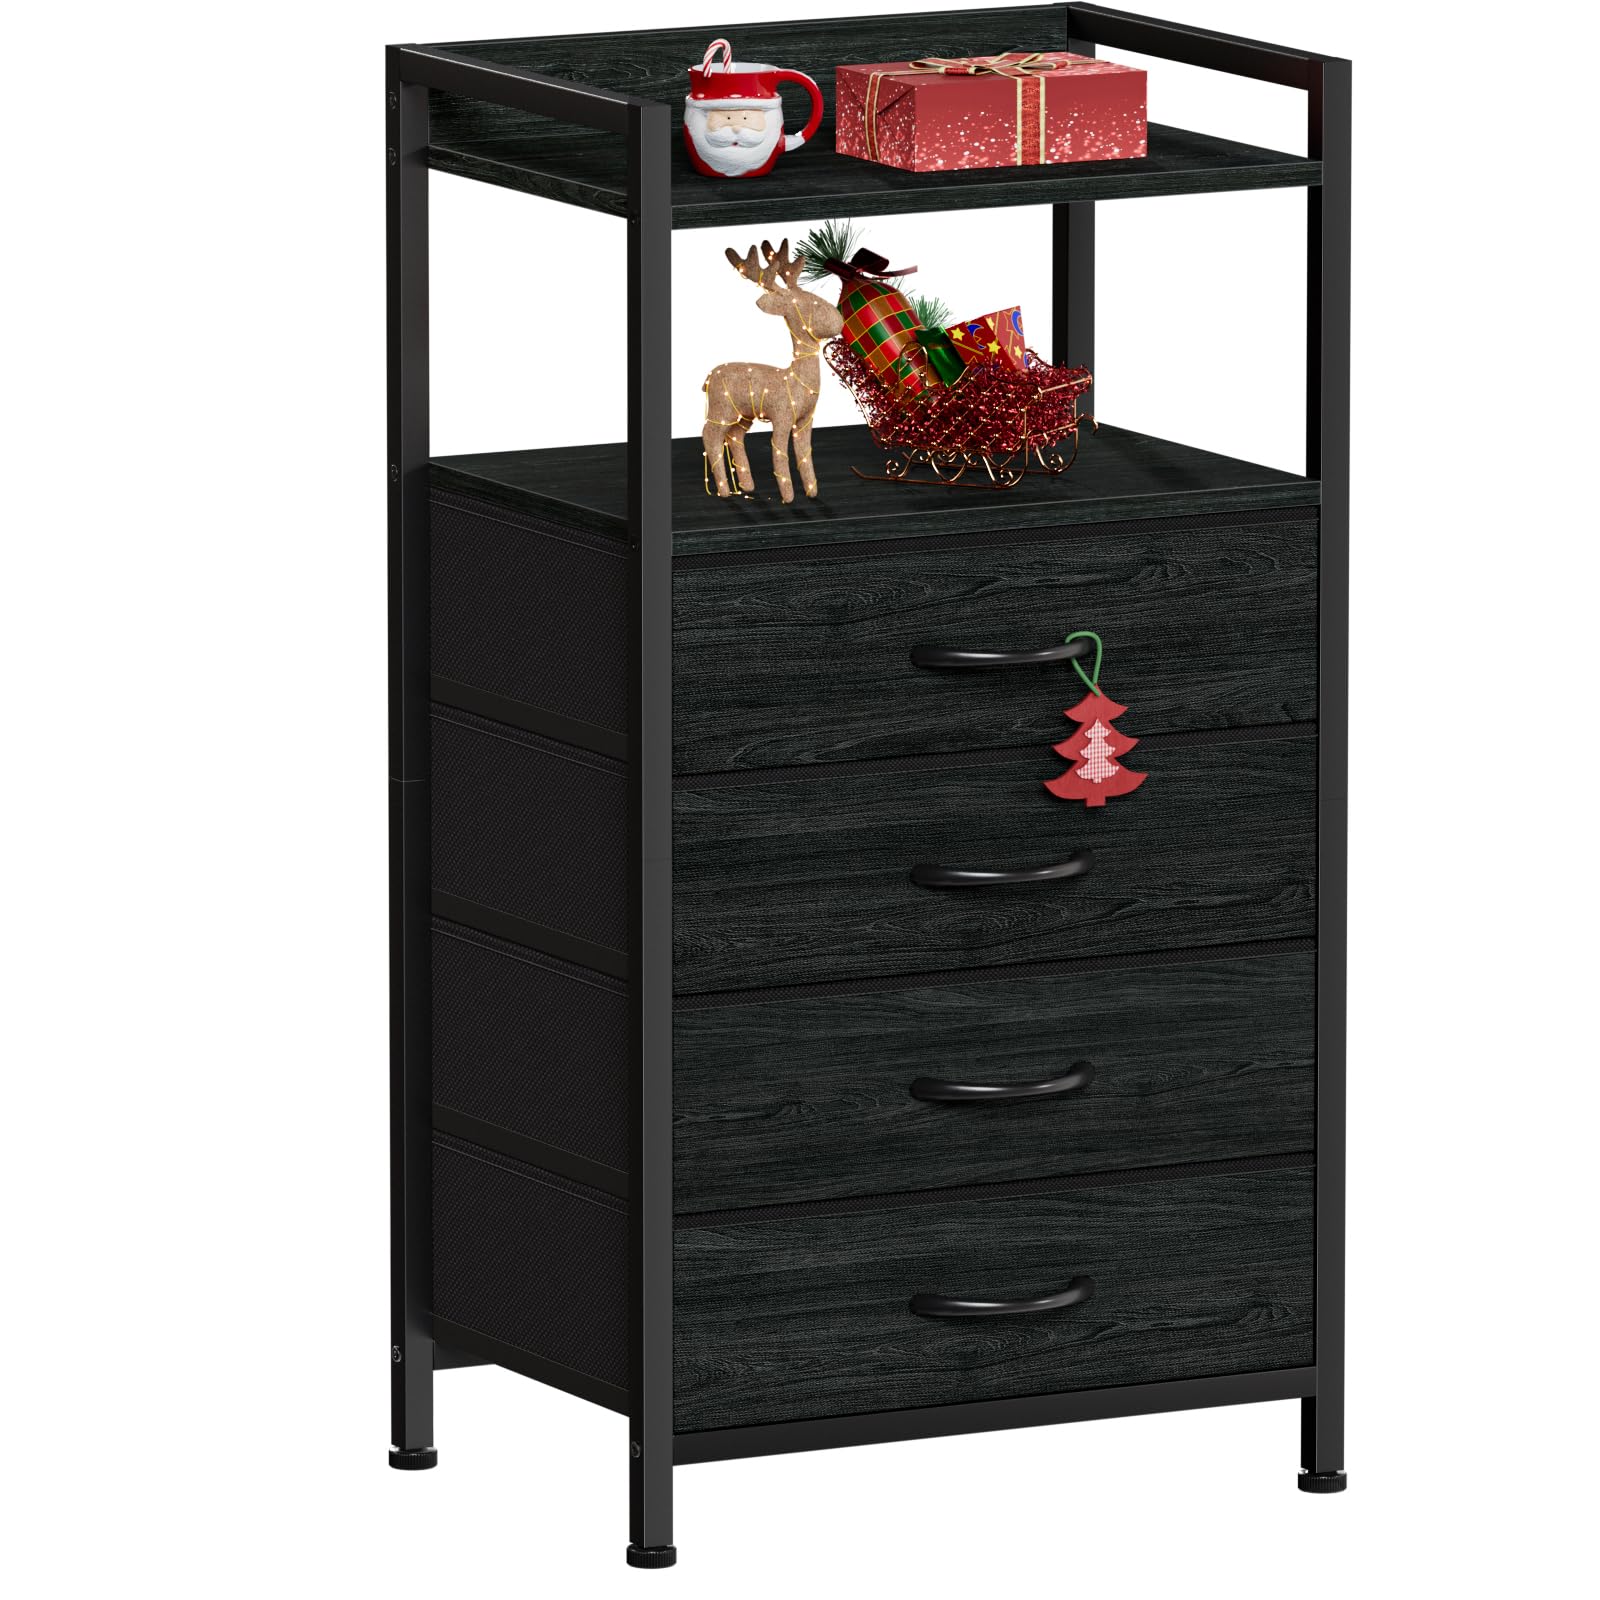 Furnulem Tall night stand for $34.17 @Amazon - Prime Members